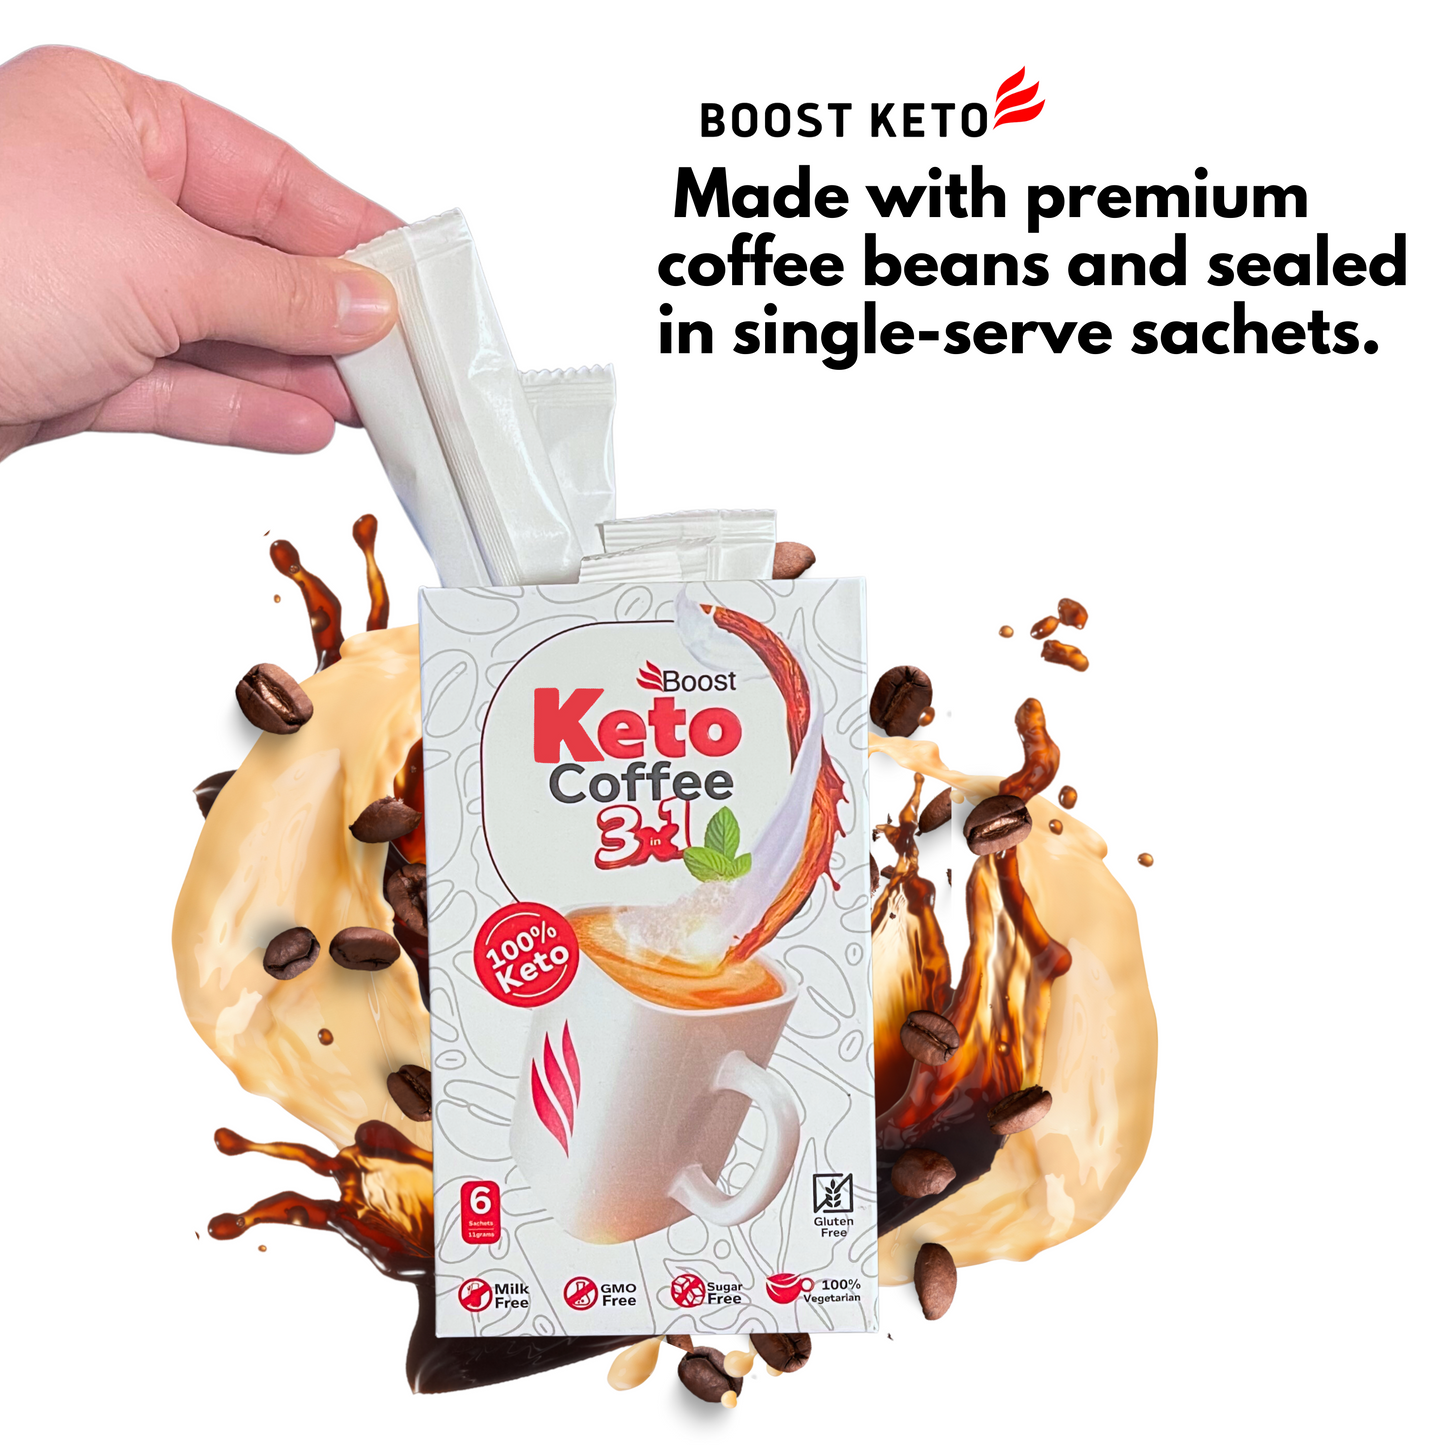 Boost keto 3 in 1 Coffee Mix